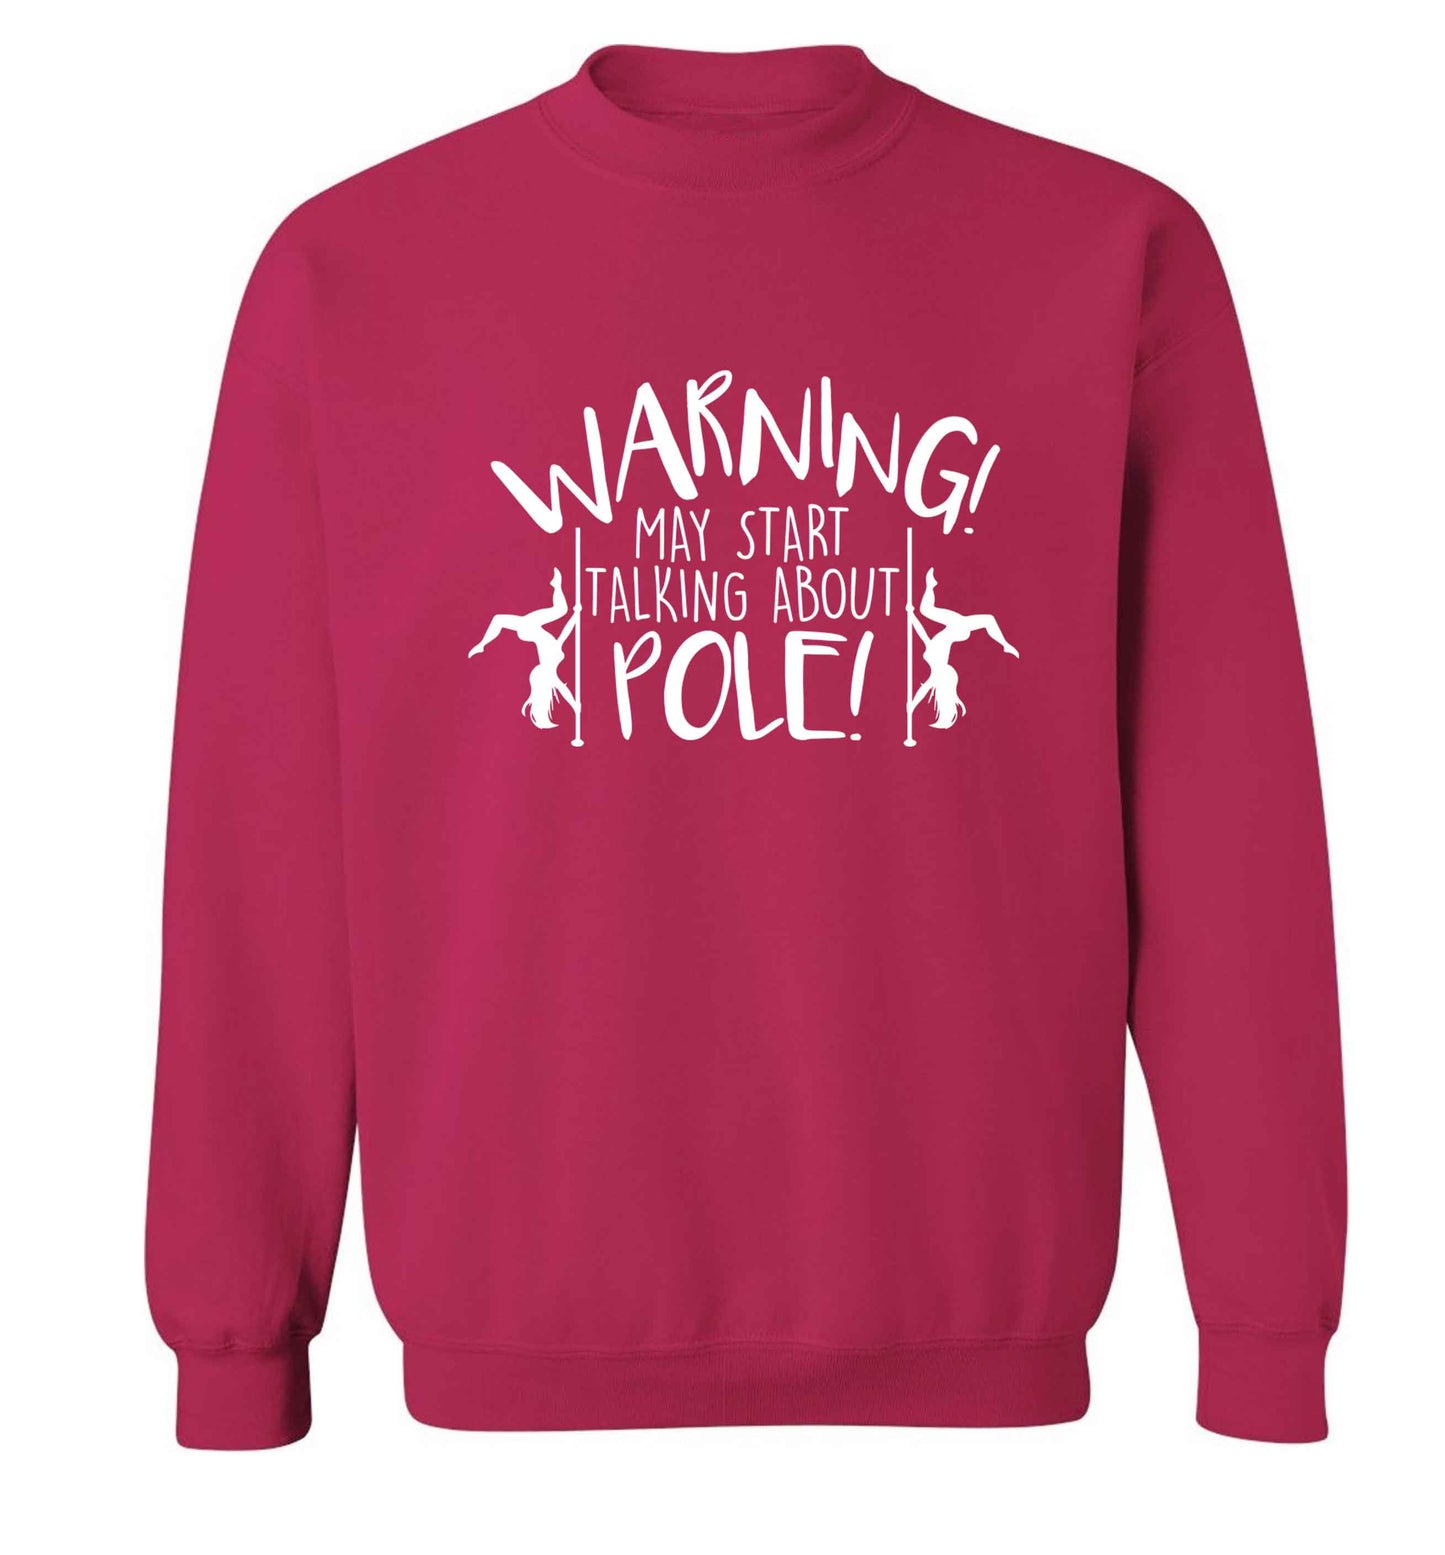 Warning may start talking about pole  adult's unisex pink sweater 2XL